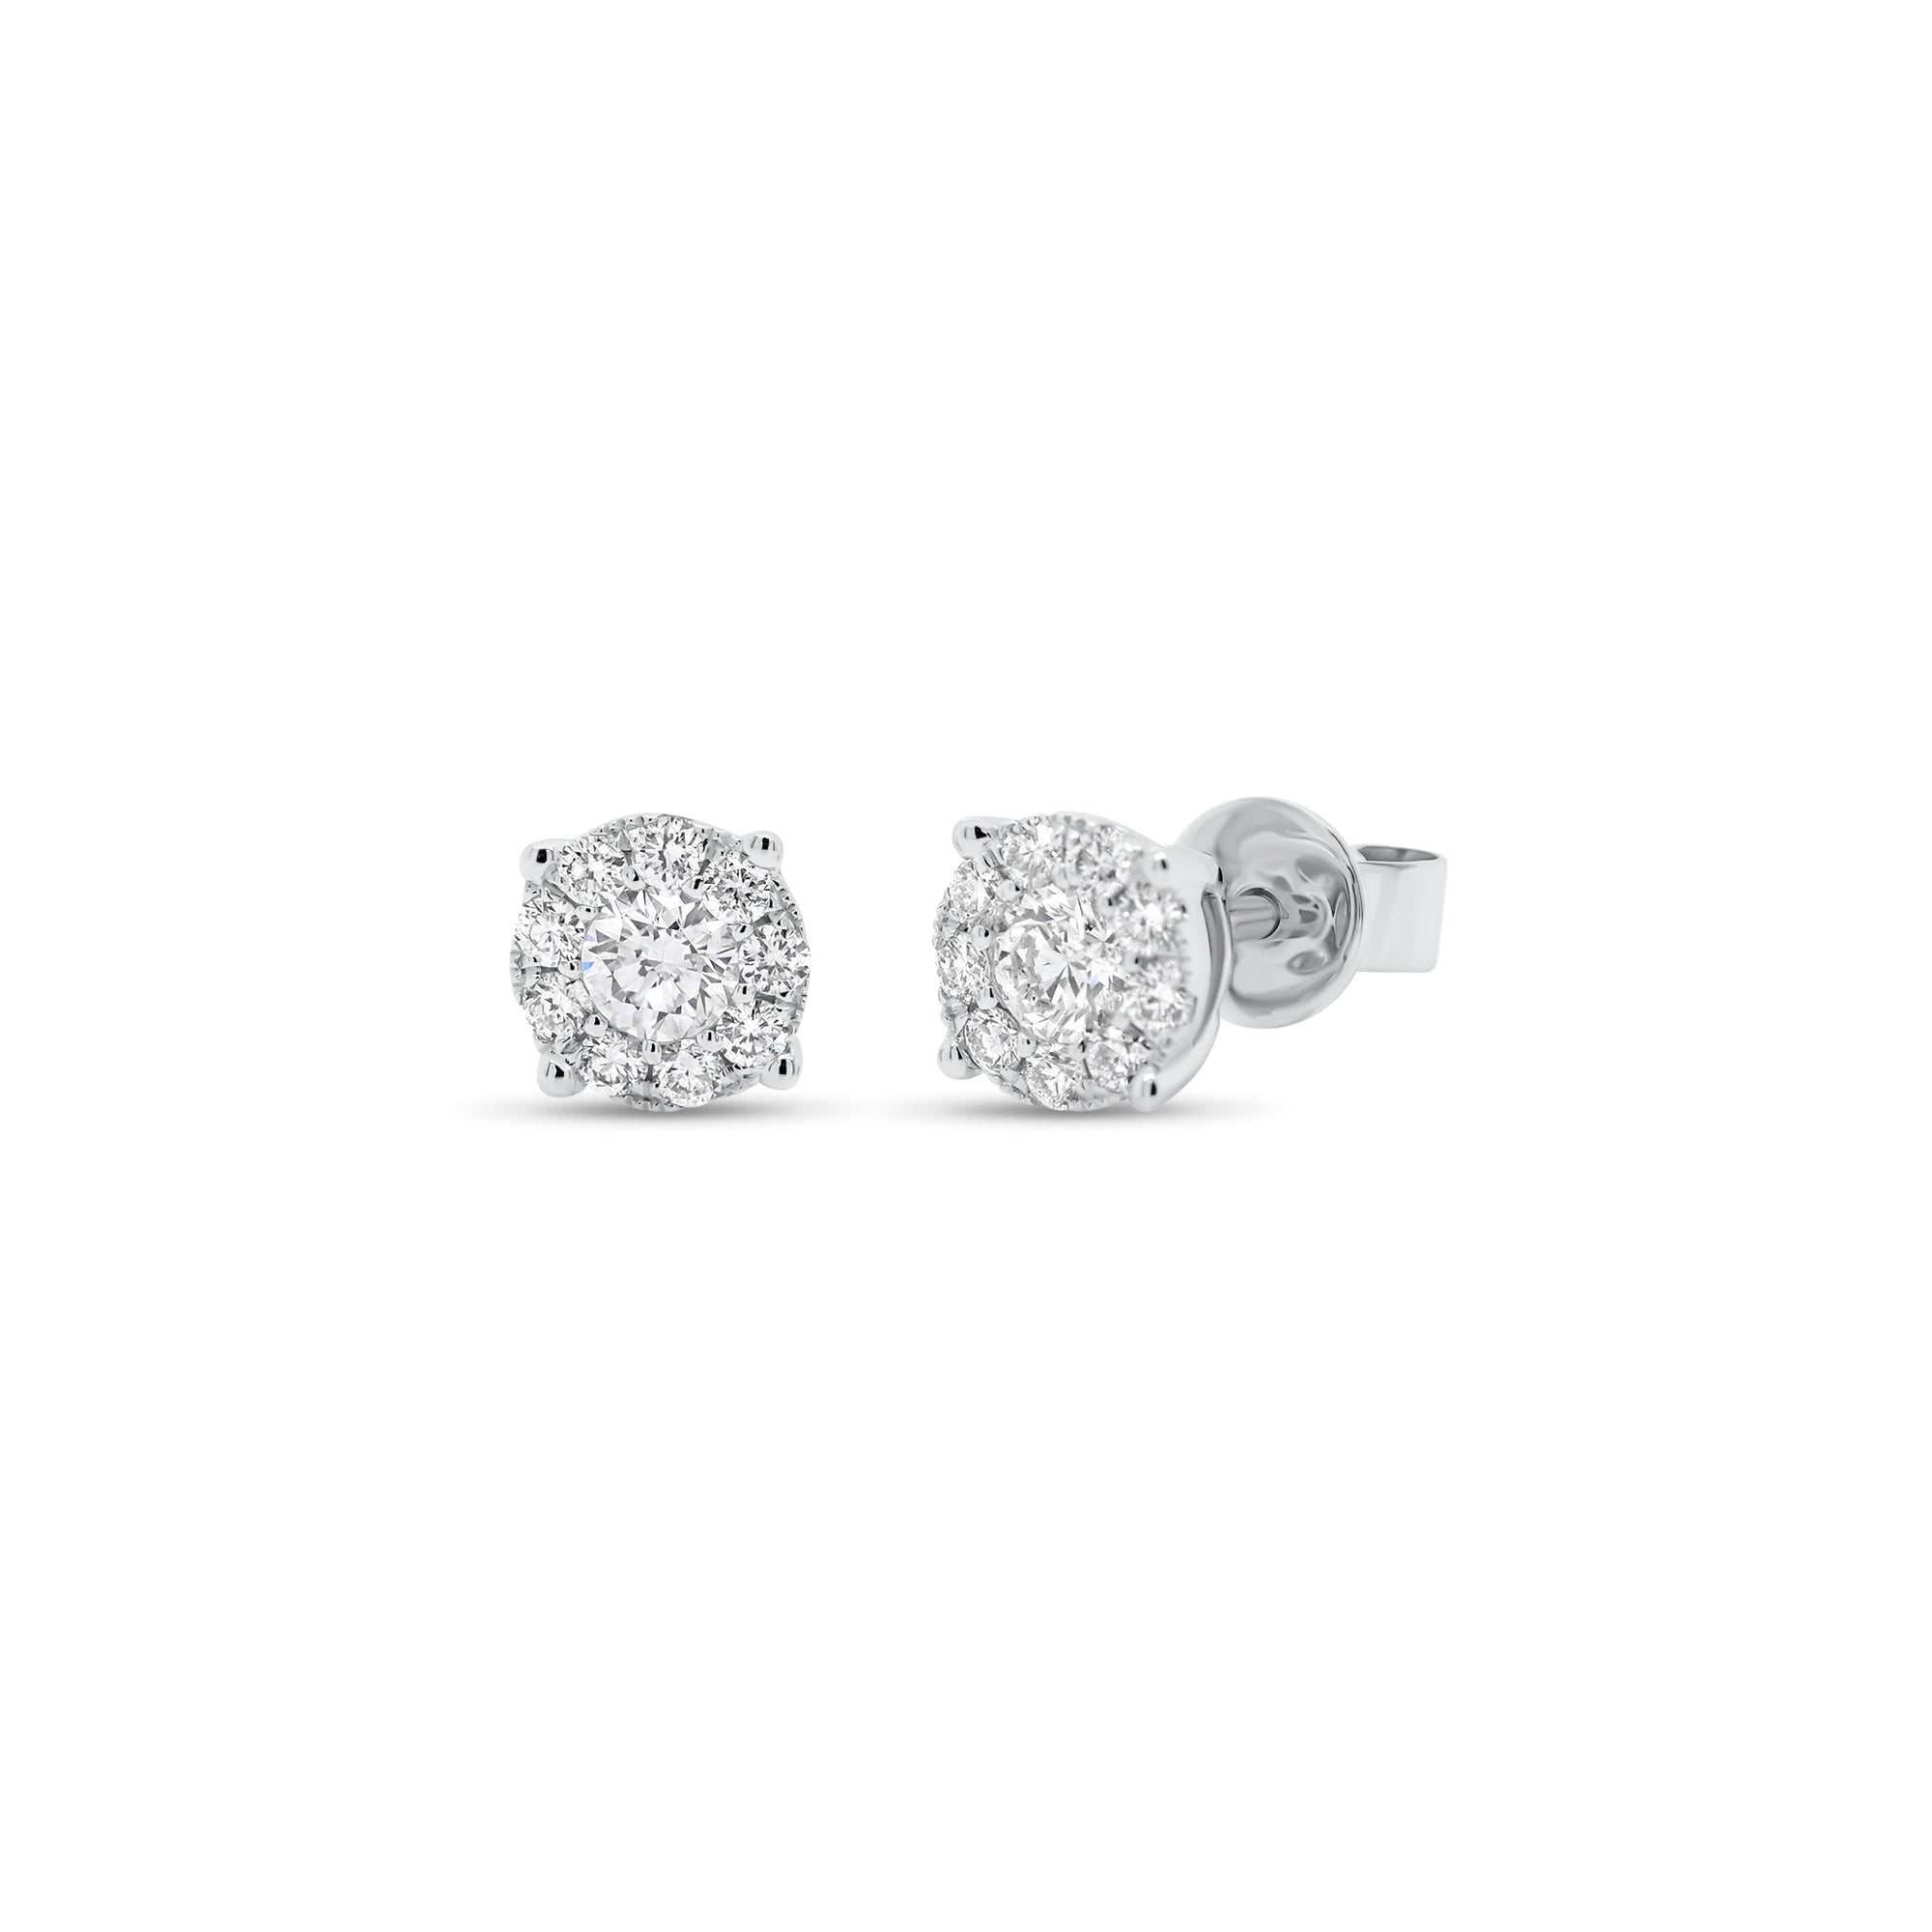 0.38 ct Round Diamond Cluster Earrings - 18K white gold weighing 1.36 grams  - 2 round diamonds totaling 0.20 carats  - 18 round diamonds totaling 0.18 carats